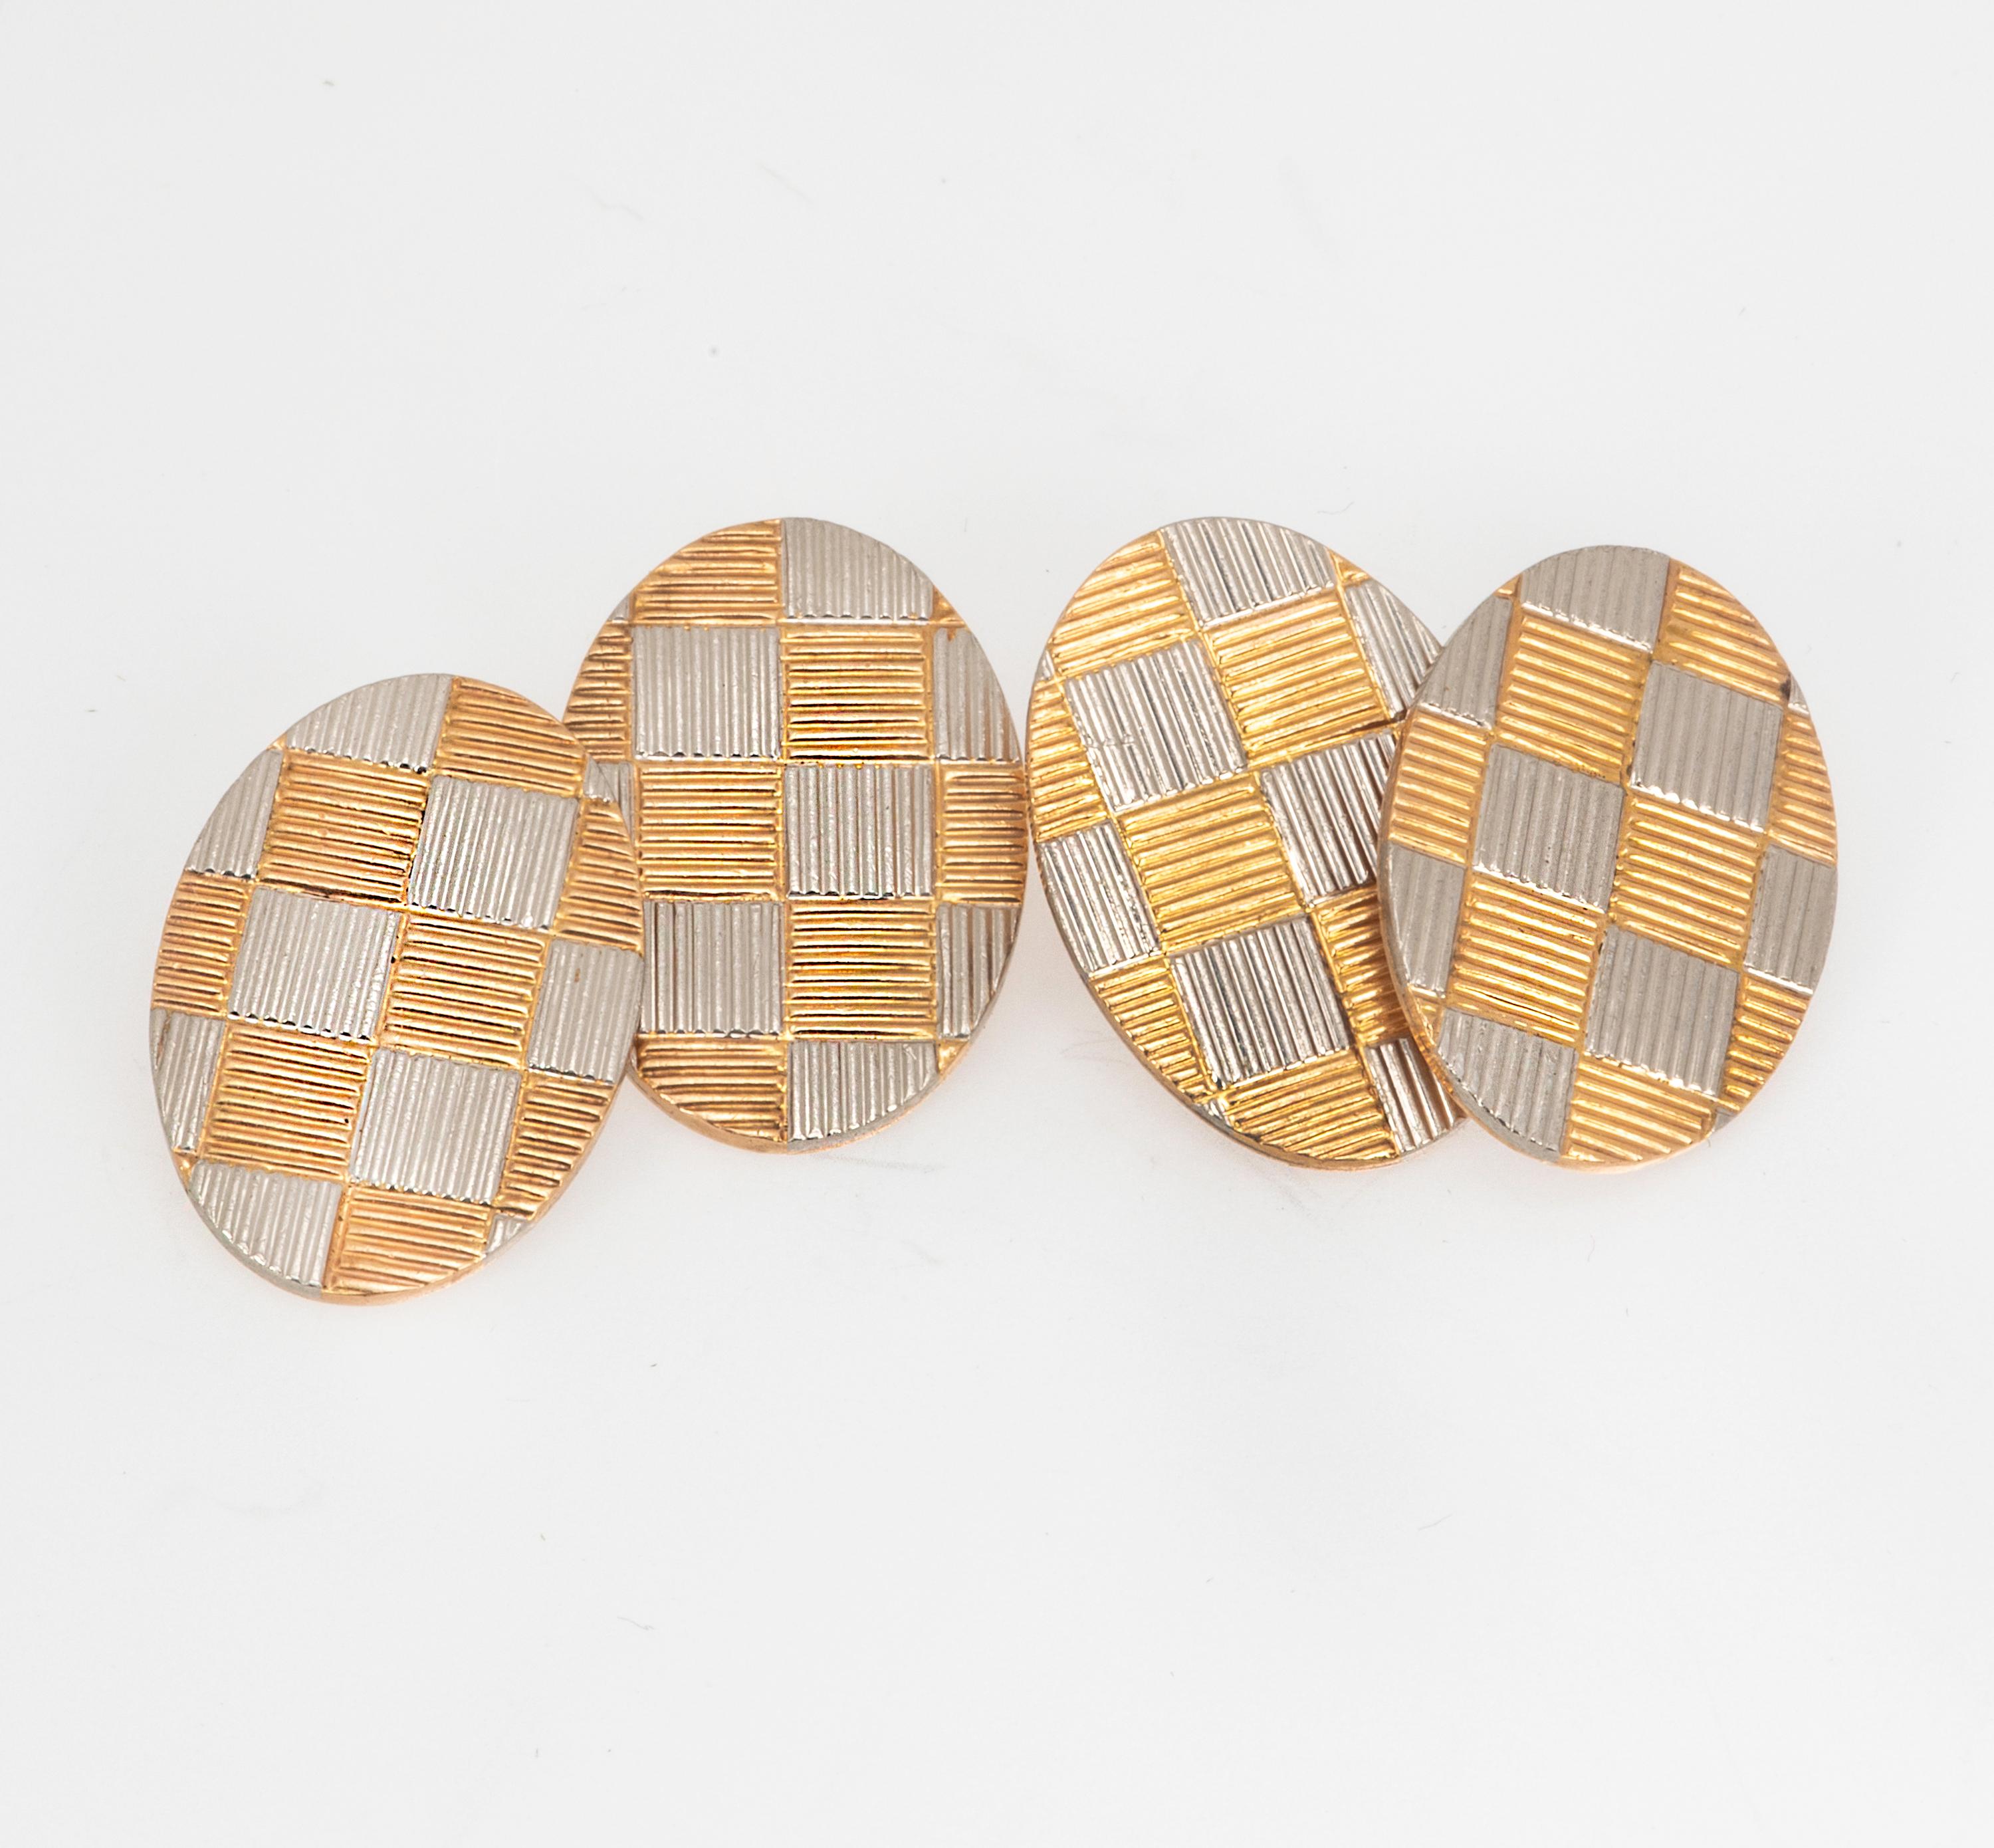 Platinum and 14k yellow gold cufflinks checker board design in oval shape.  From estate collection.  Elegant pair!